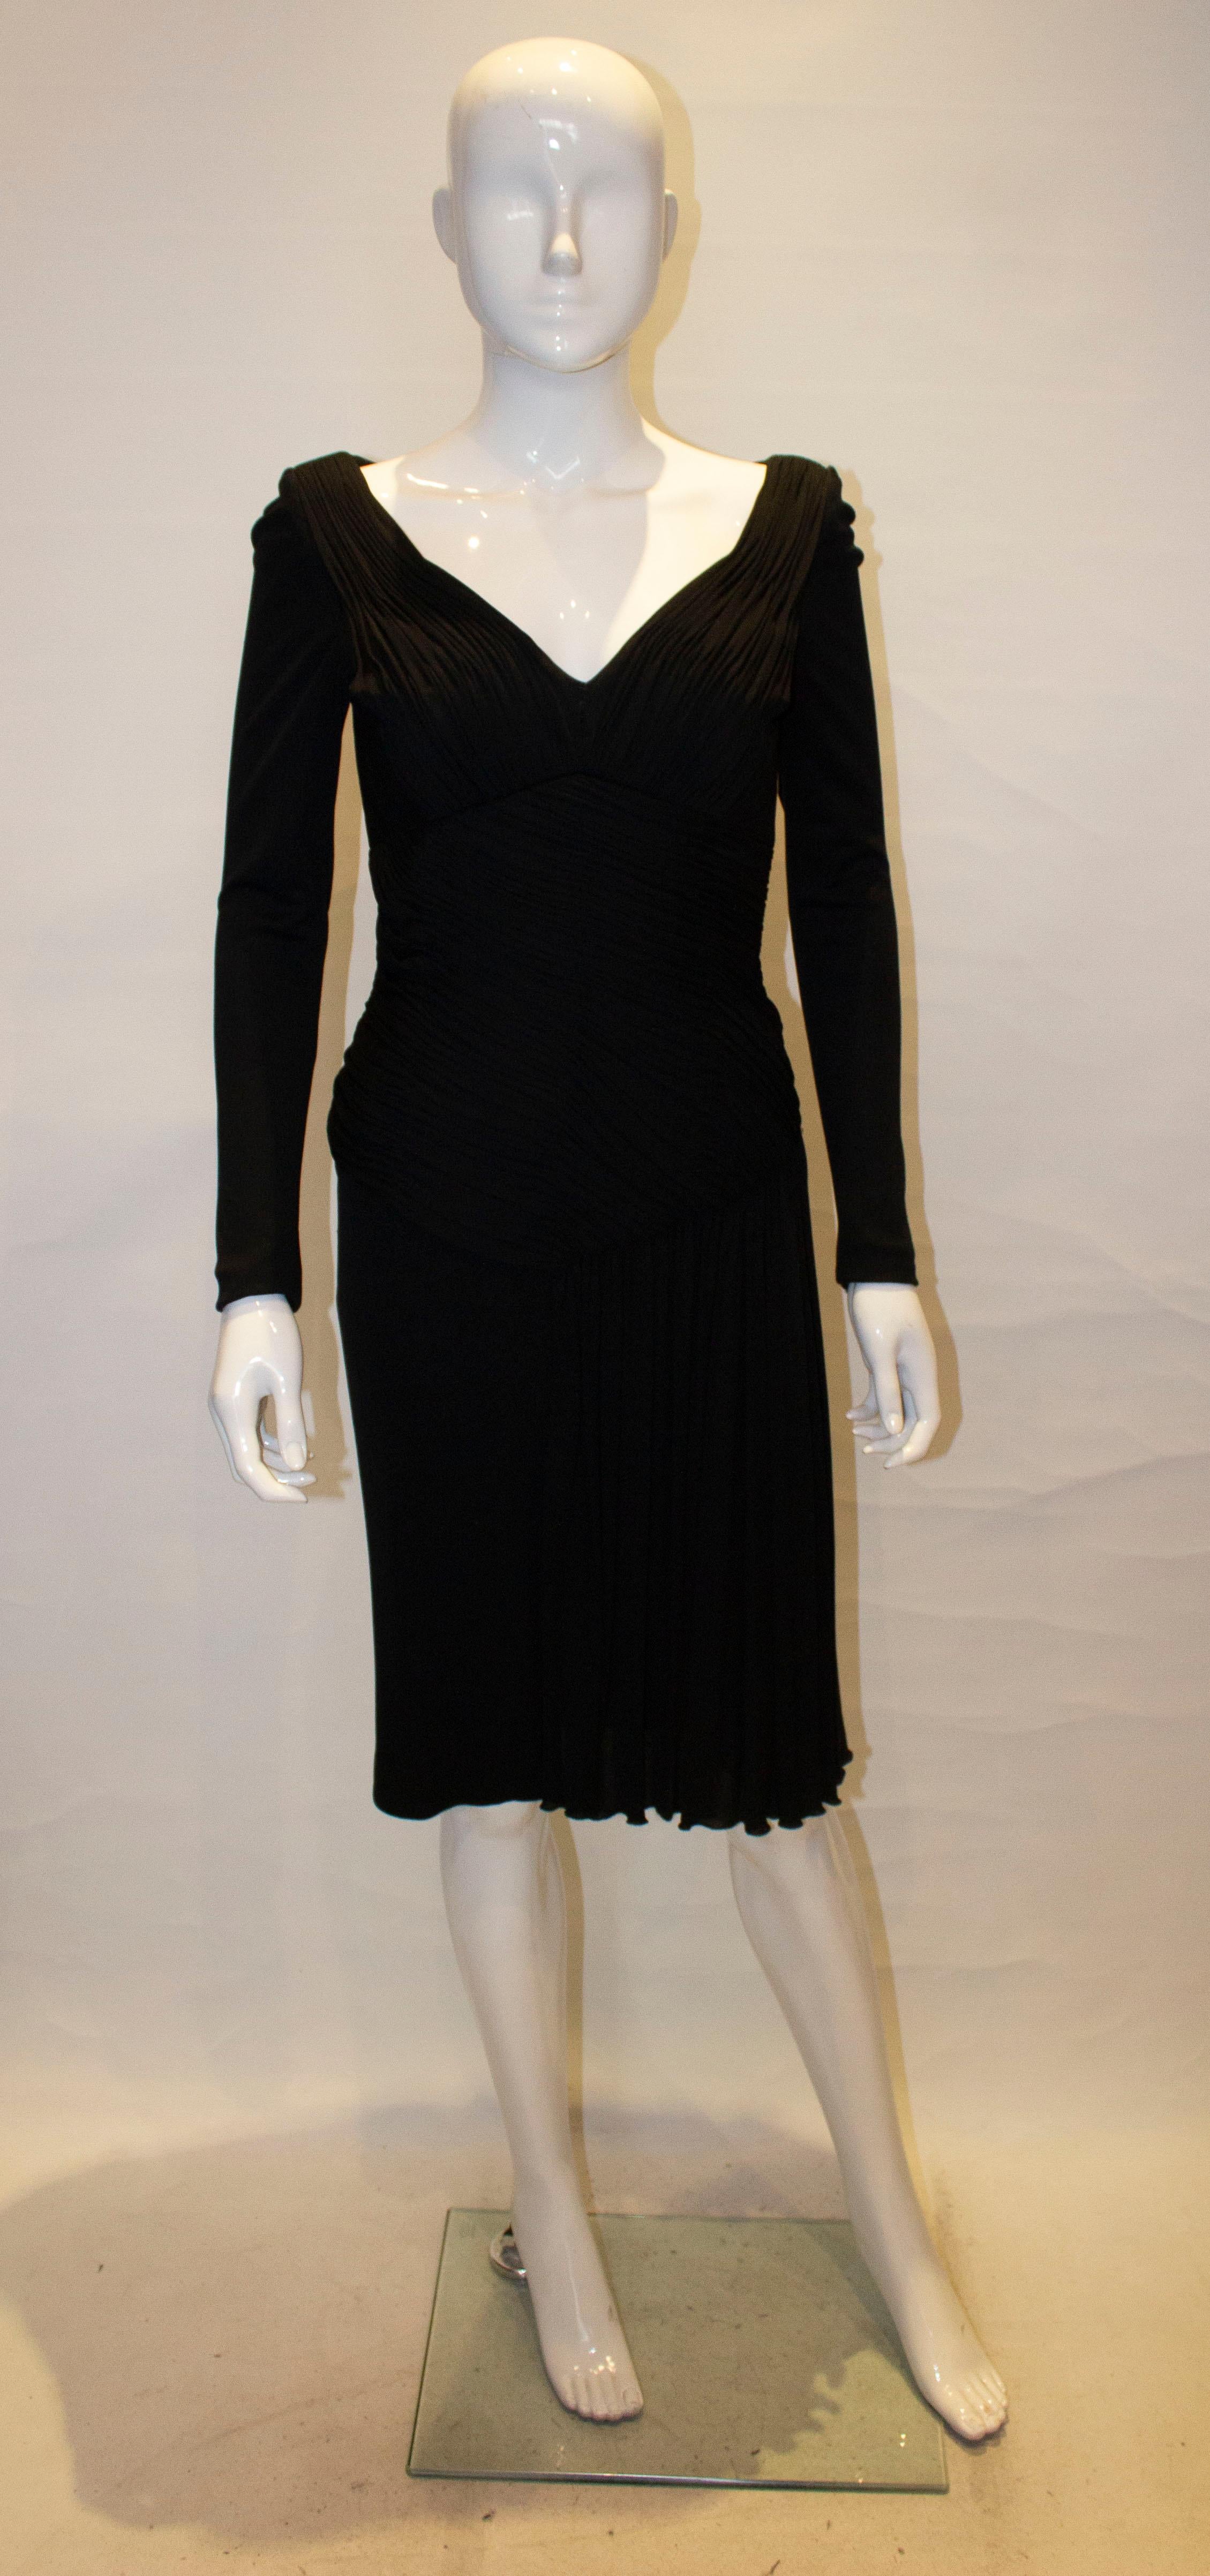 A stunning black vintage cocktail  dress by Vicky Tiel Couture. The dress has a v neckline with draping and folds over the waist area and one side. It has a central back zip ,  is fully lined and hangs beautifully. Bust 35'', length 40''